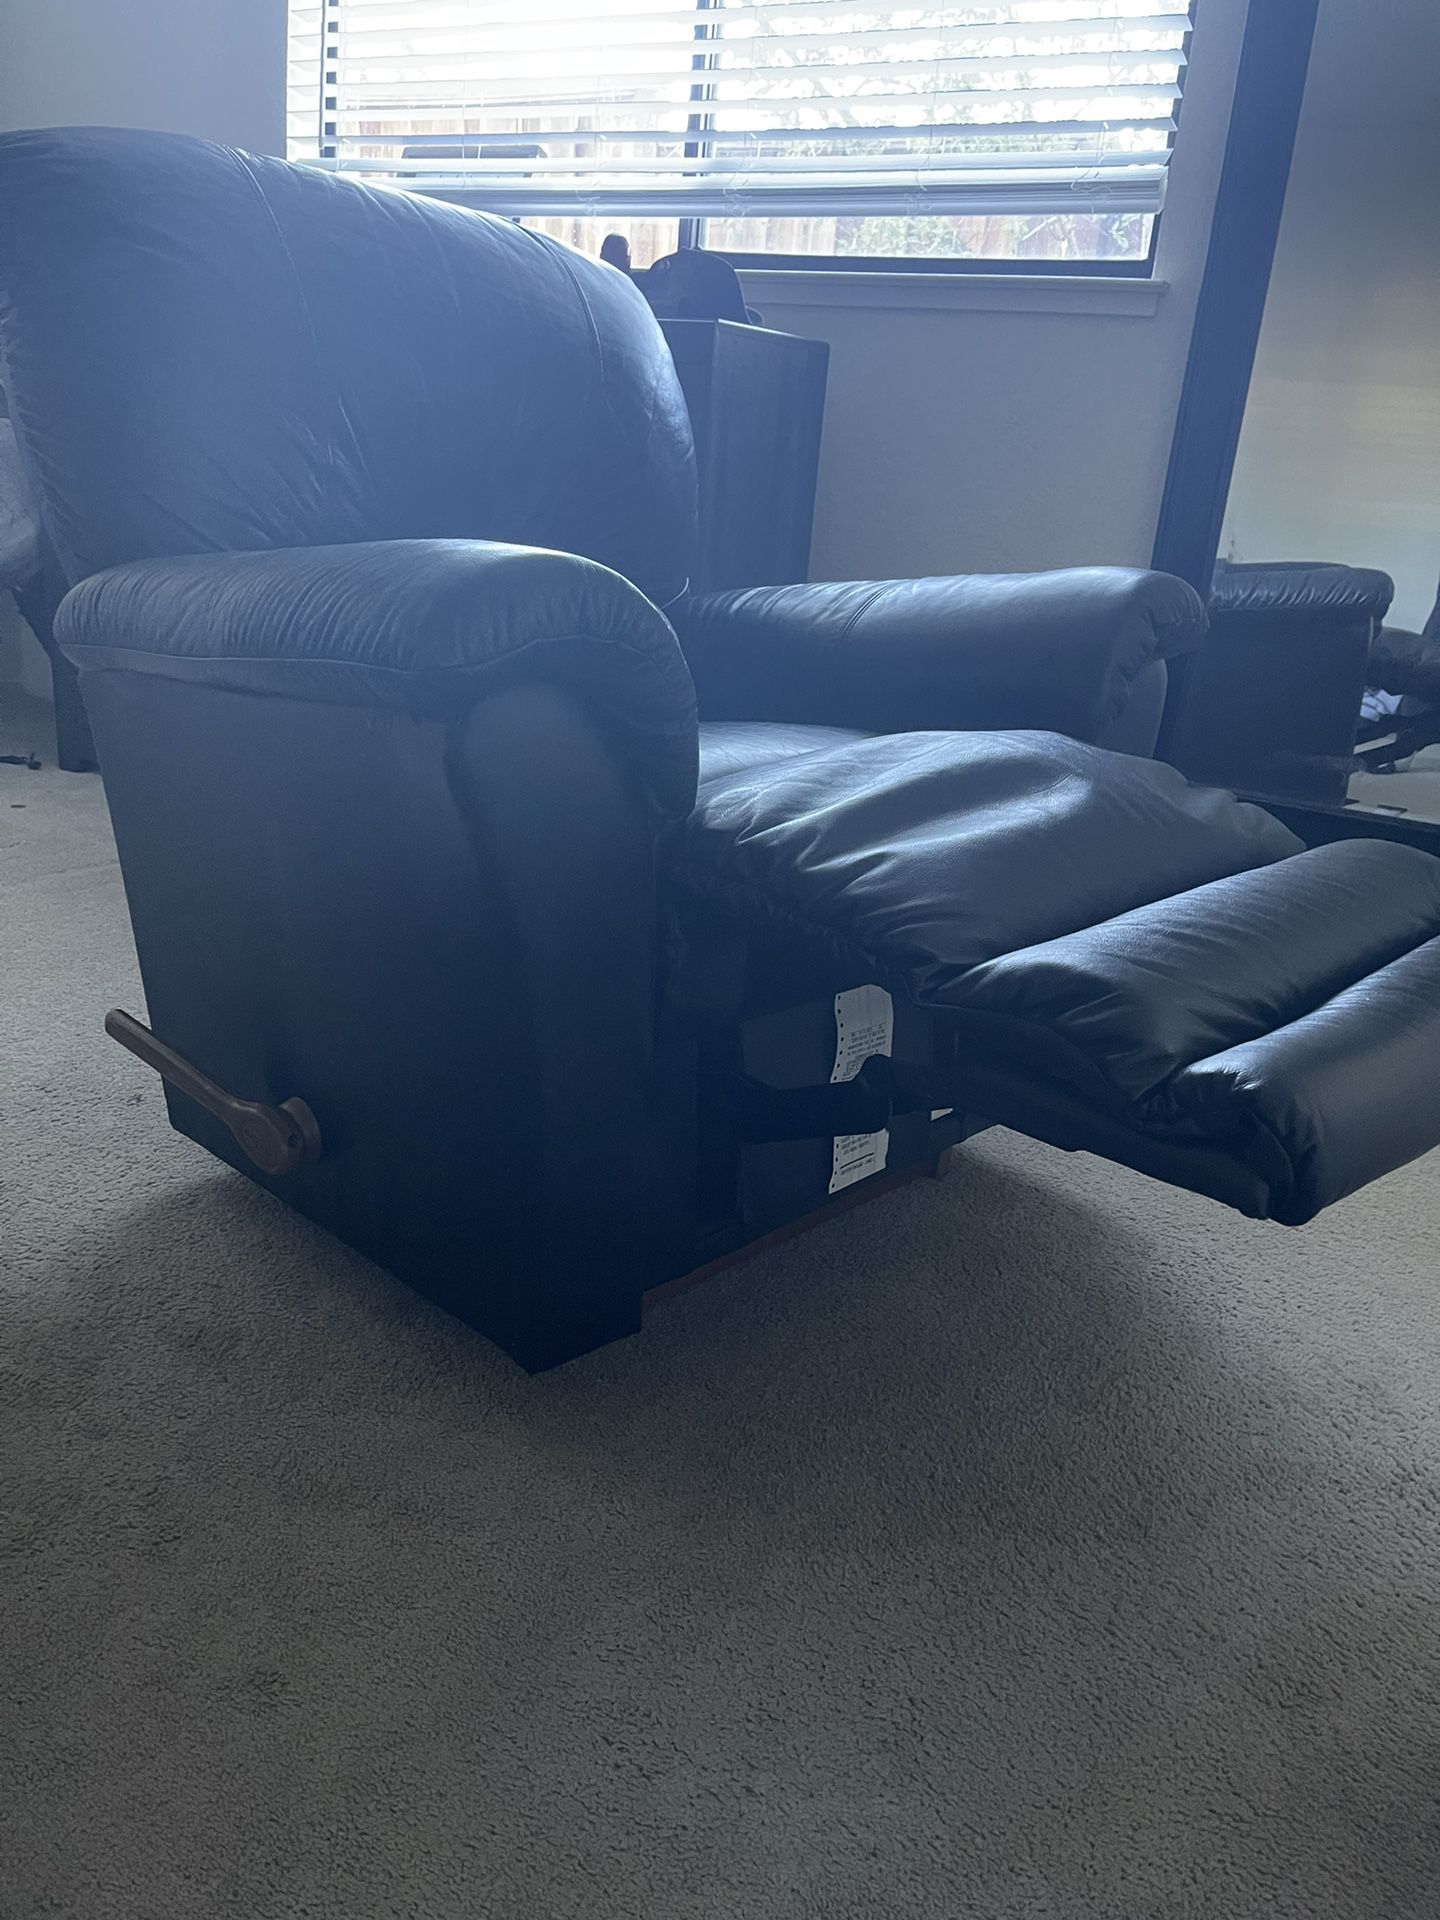 LA - Z Boy - Black Leather Recliner - Barely Used - Not Rips/holes